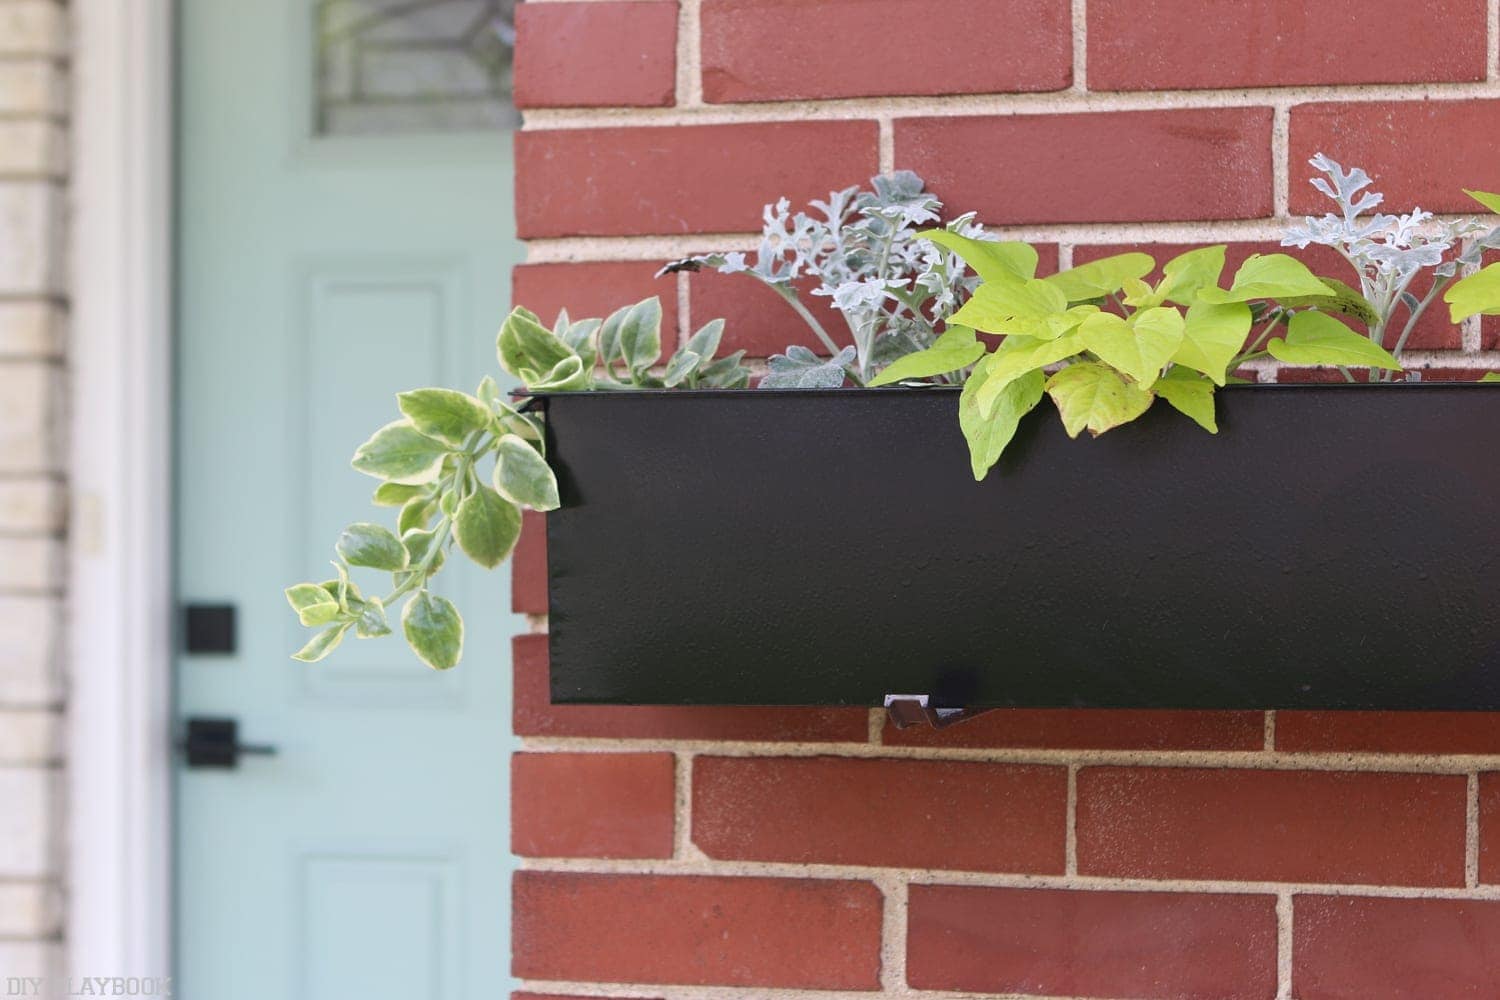 The black window boxes pair nicely with the new black handle